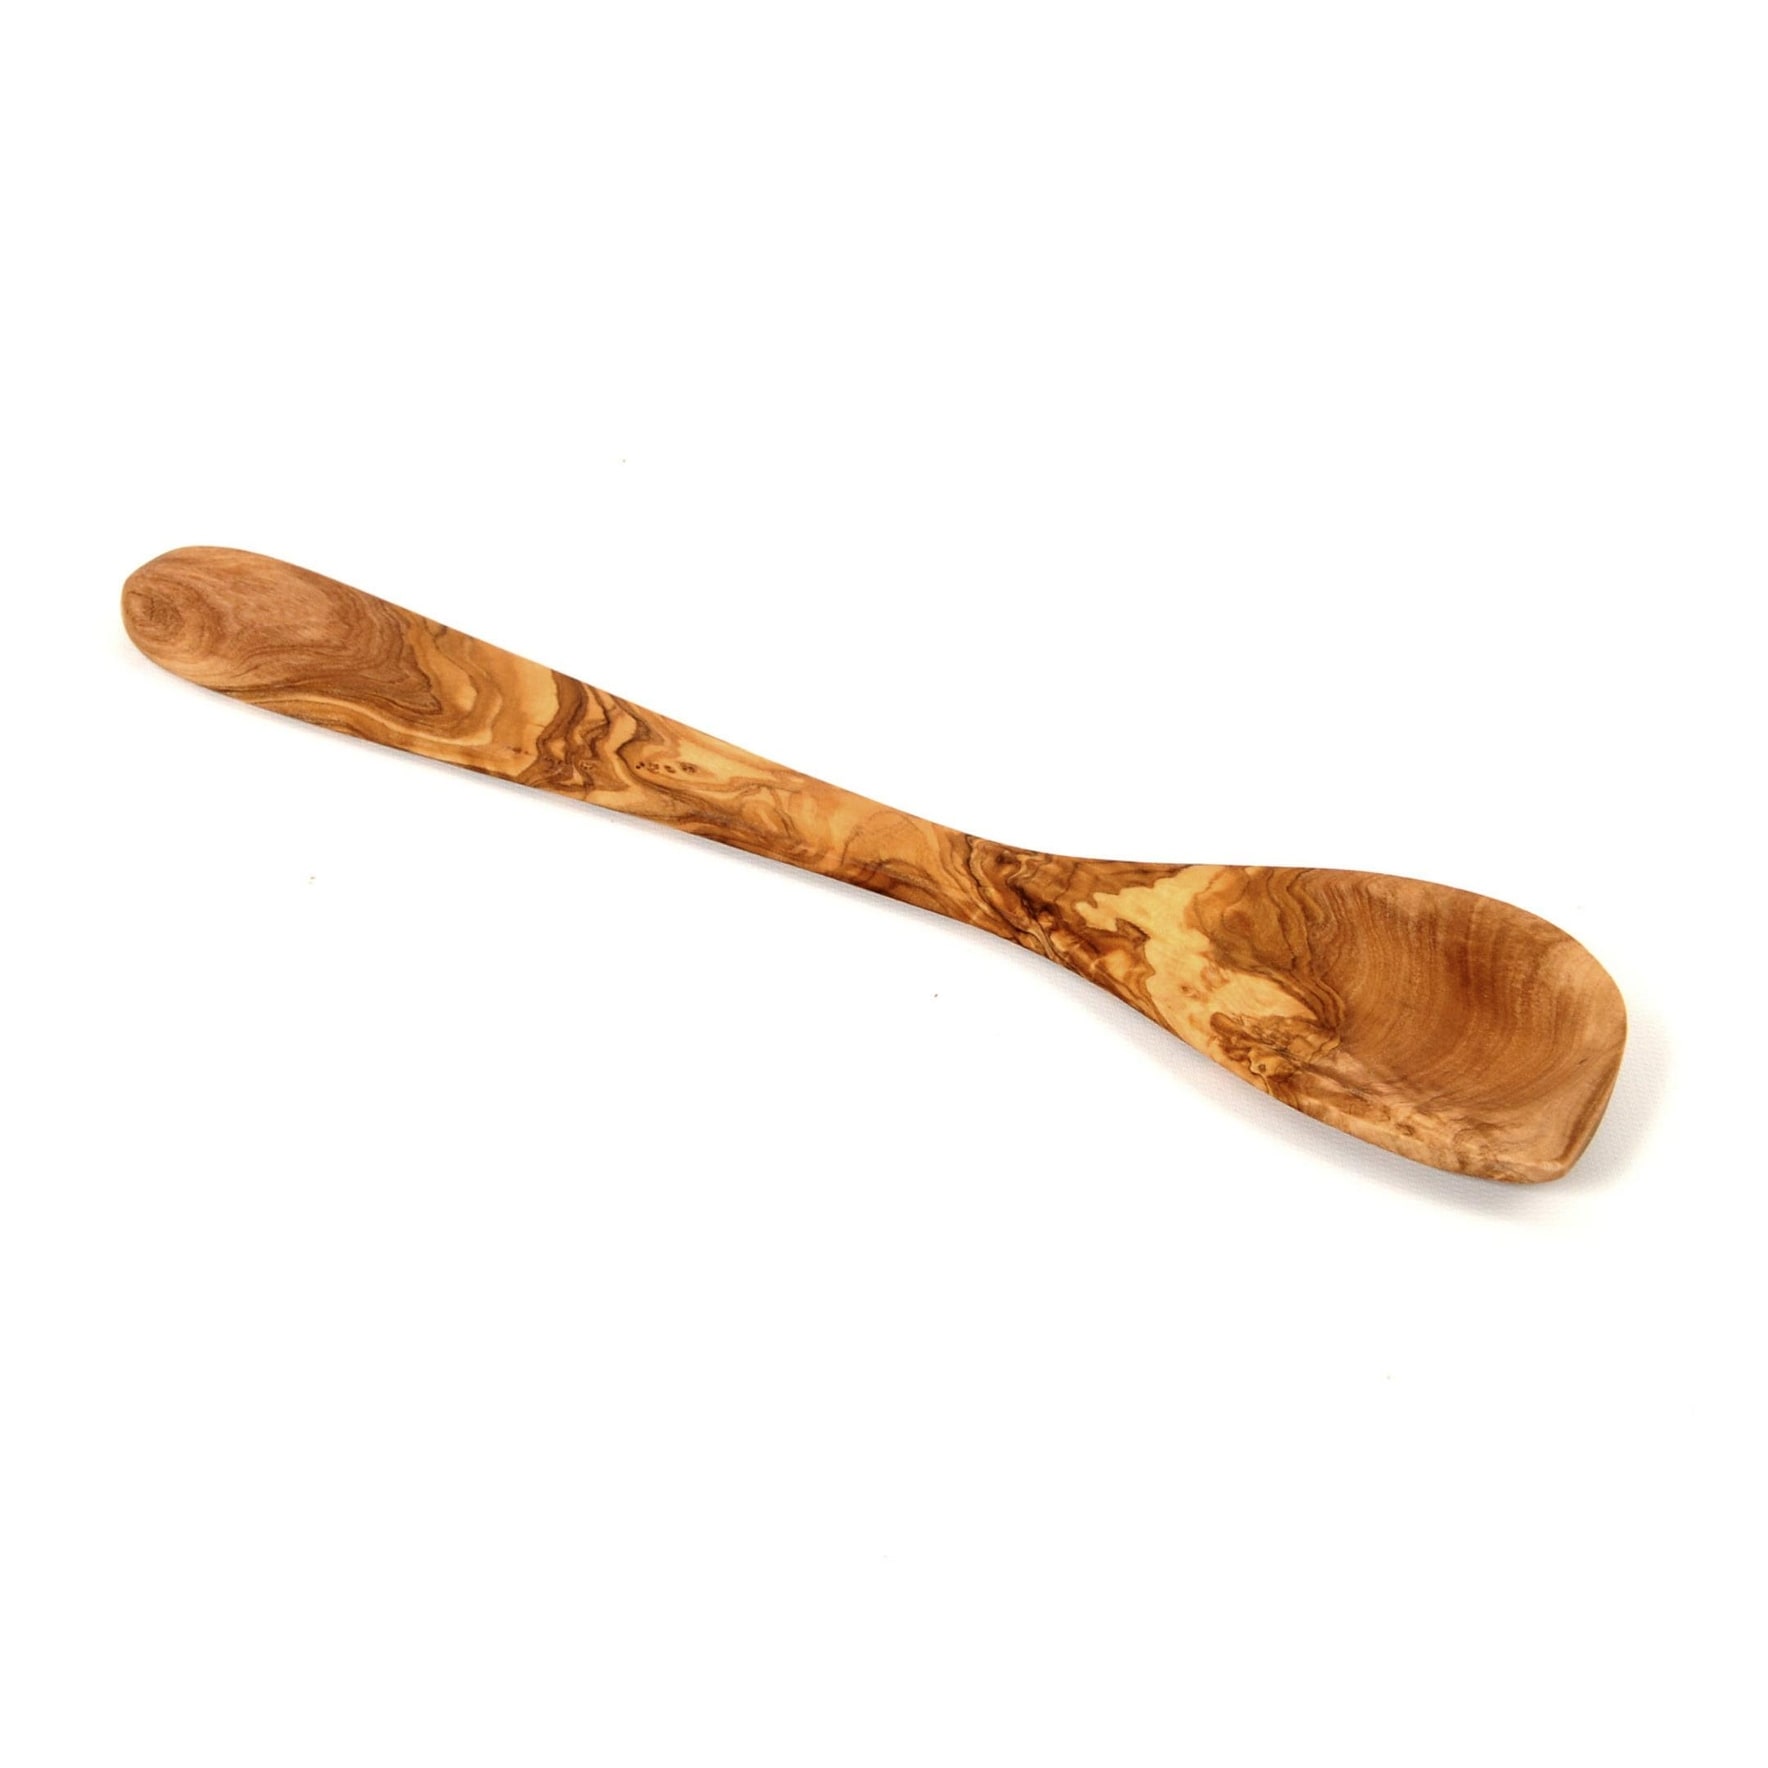 https://ak1.ostkcdn.com/images/products/is/images/direct/82b6604790867e1c2a9b336252e8479f4792b44b/Wooden-Spoon-Olive-Wood-Pointed-Cooking-Spoon.jpg